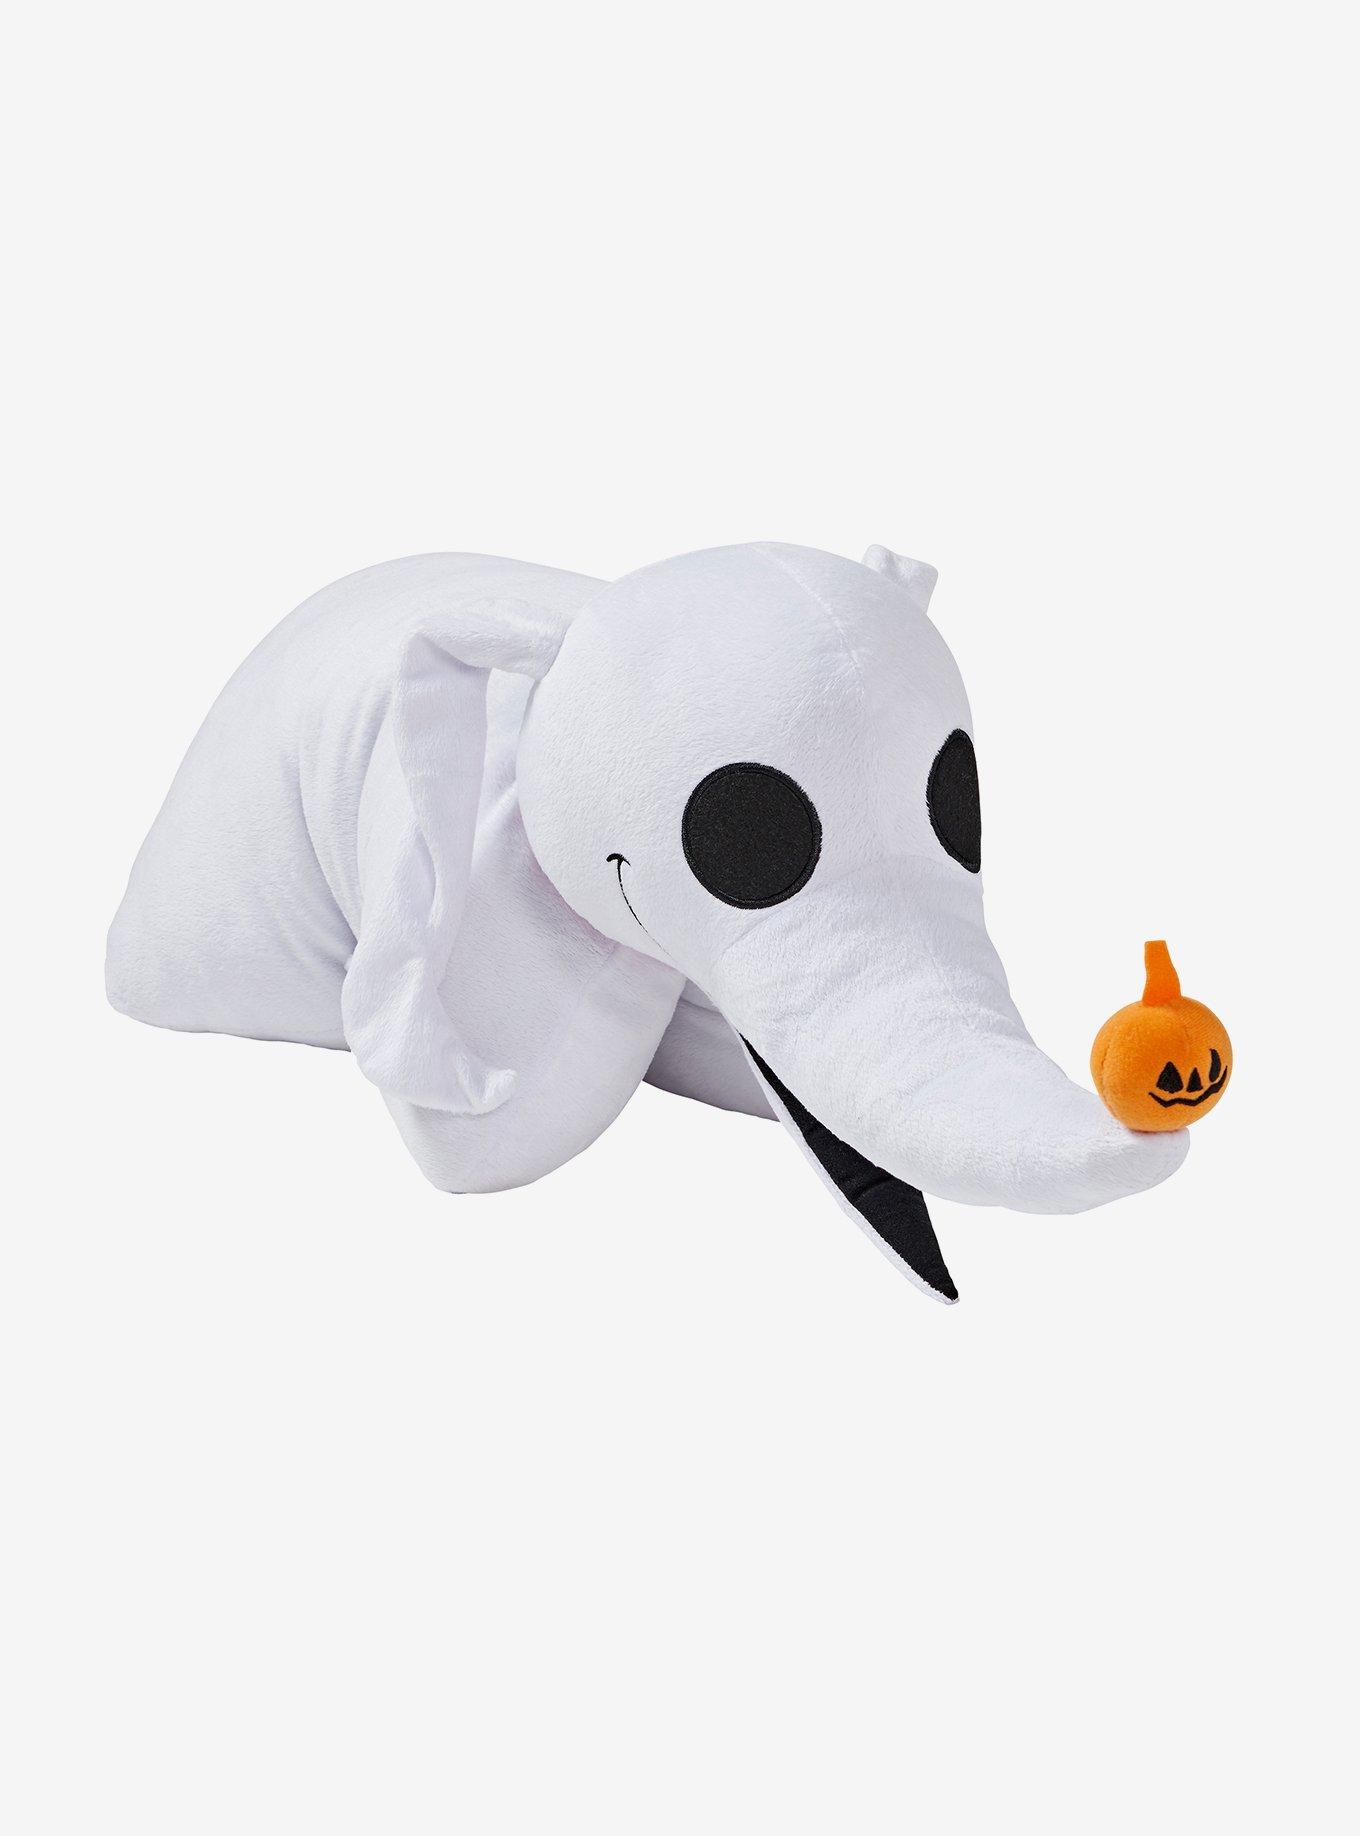 The Nightmare Before Christmas Zero Pillow Pets Plush Toy